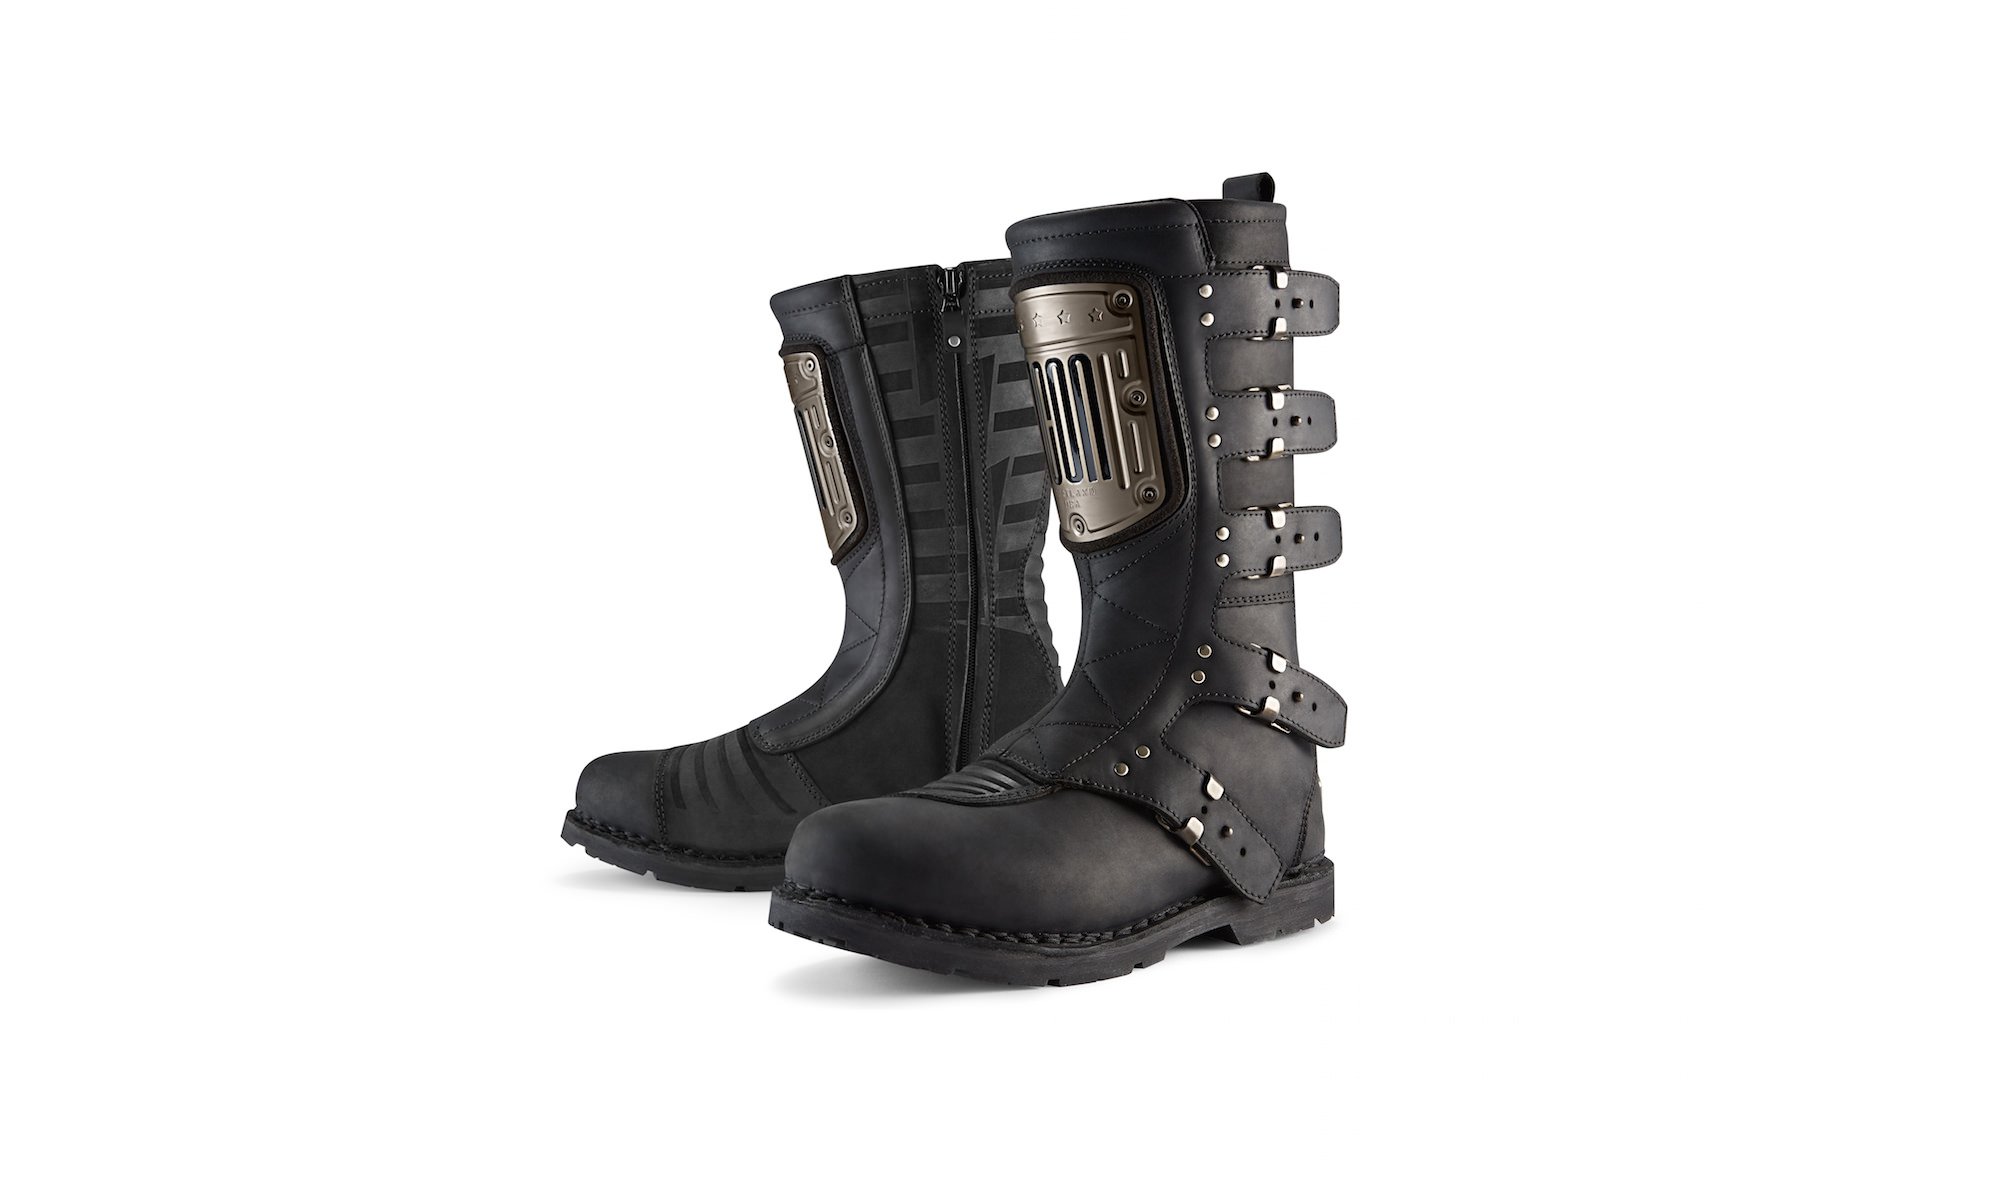 ICON 1000 Elsinore HP Motorcycle Boot